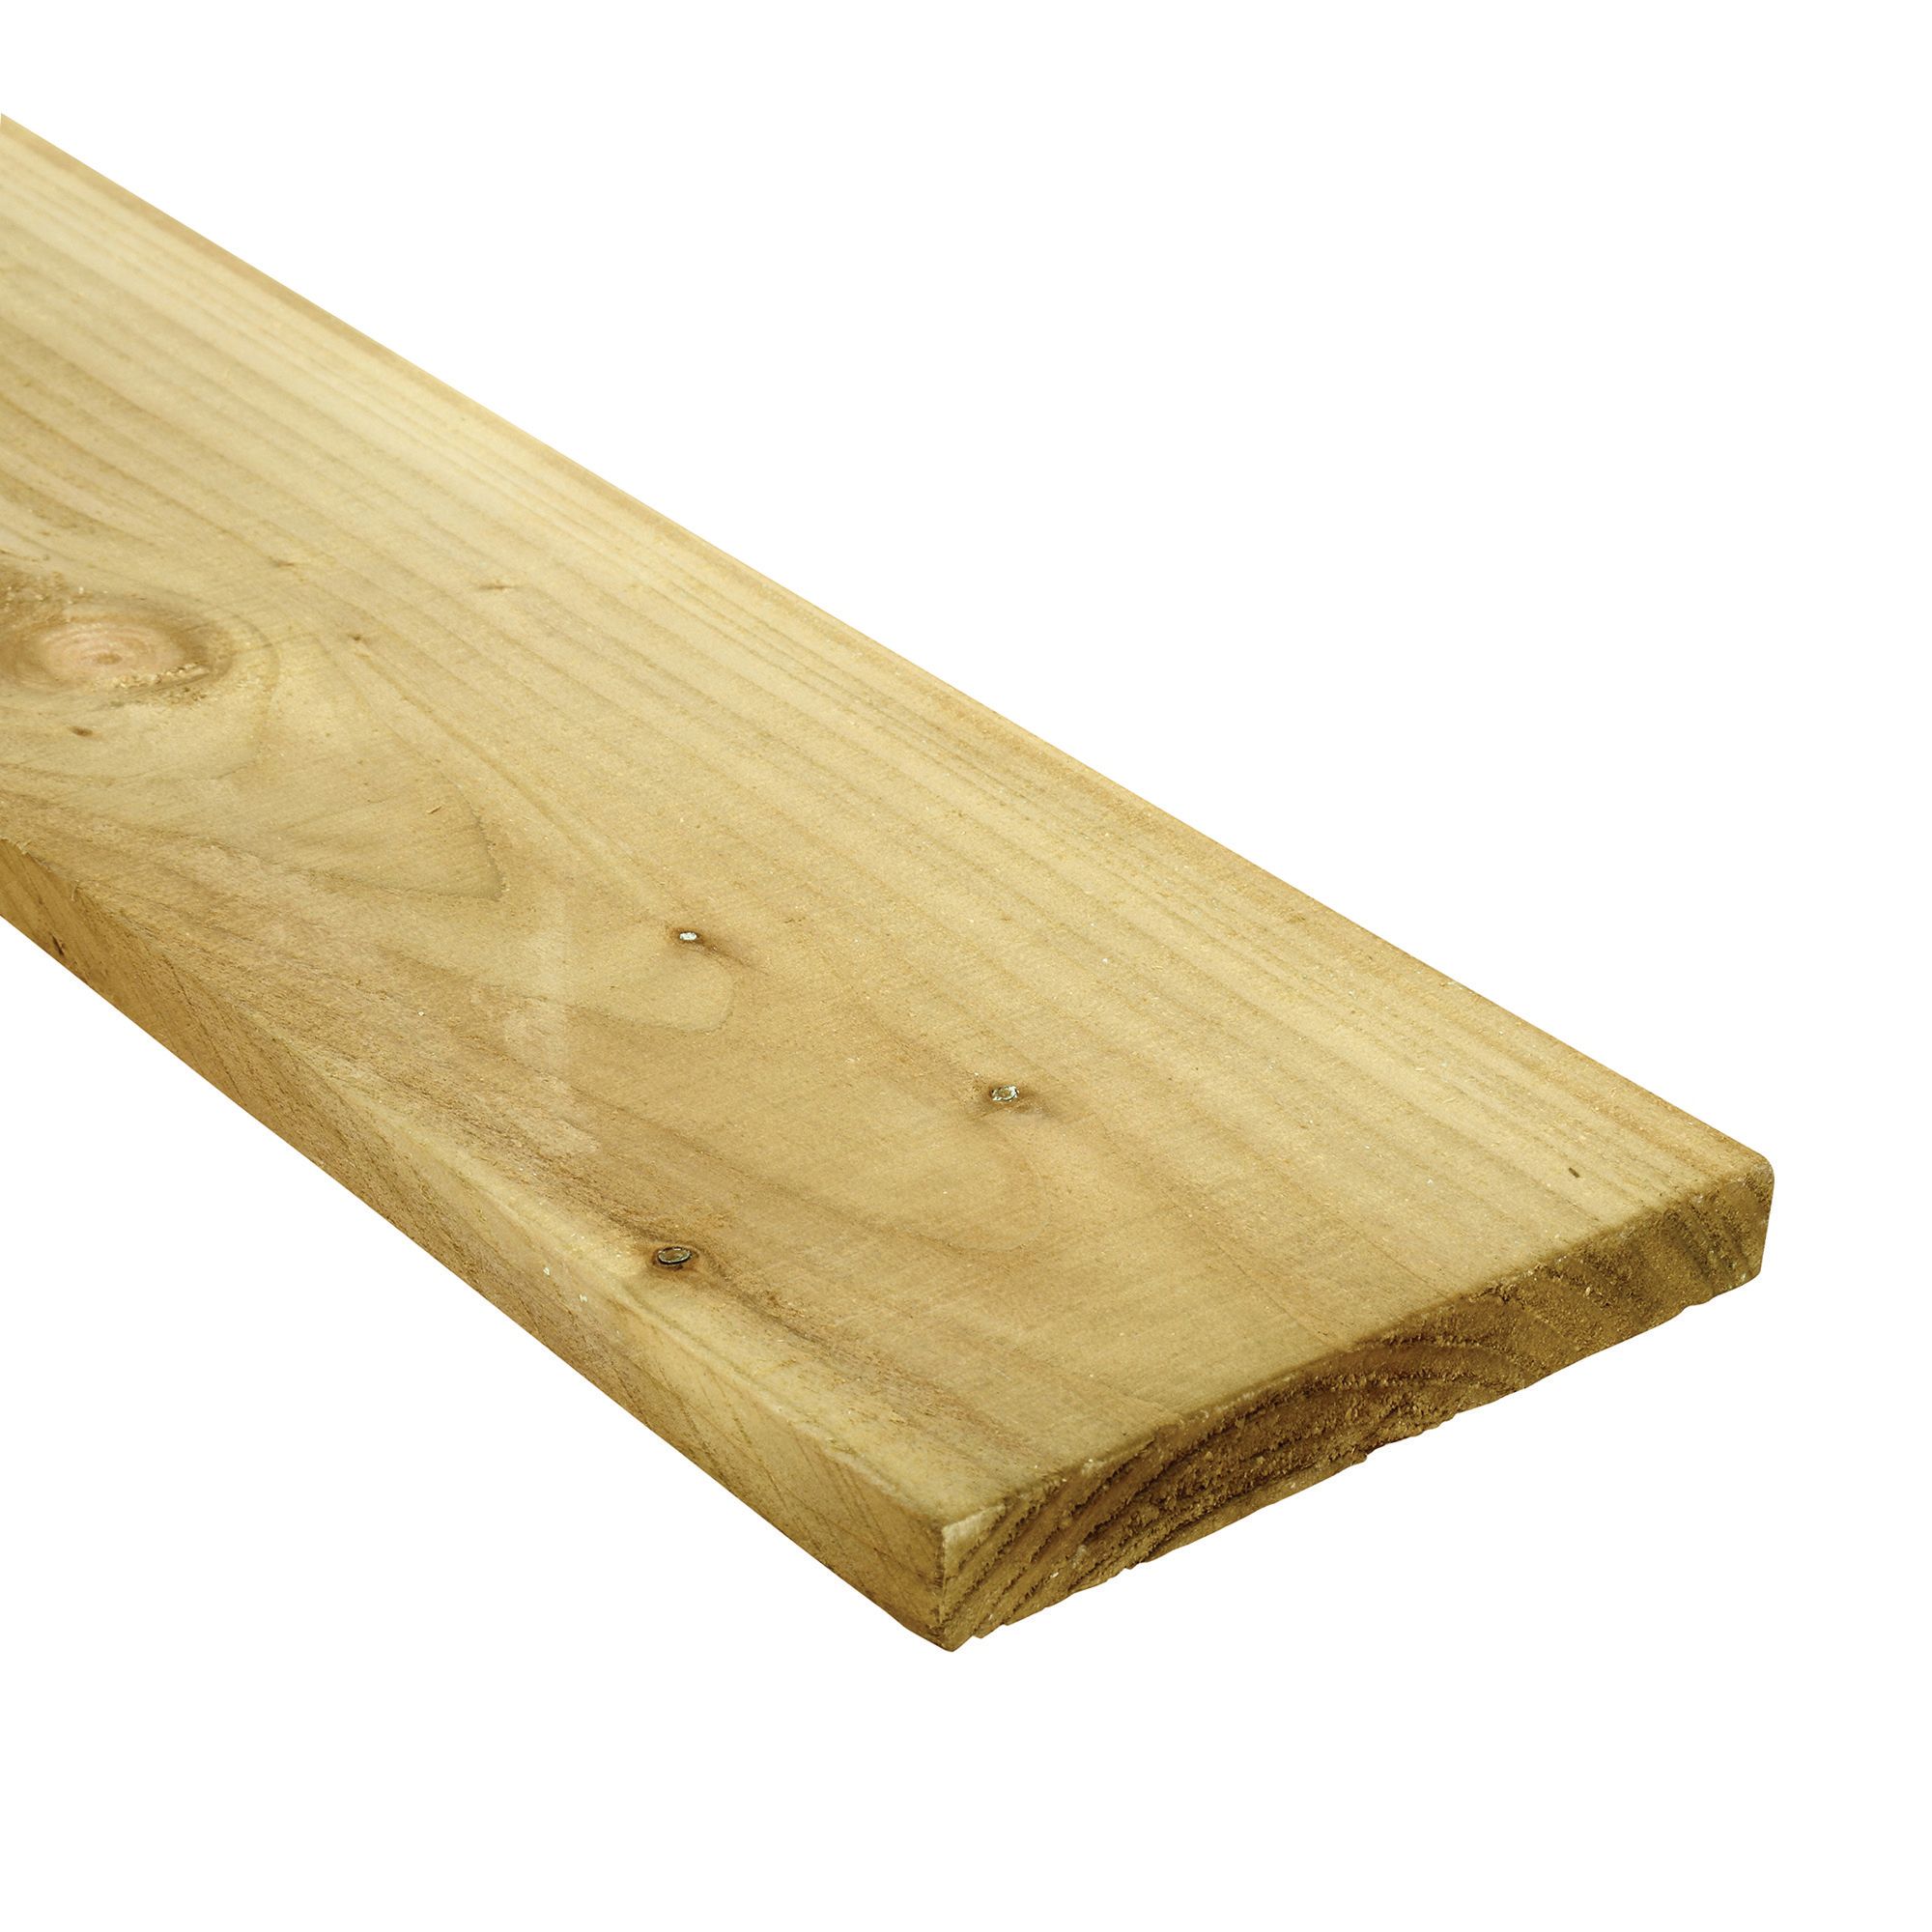 Image of Wickes Treated Timber Gravel Board - 19mm x 150mm x 2.4m